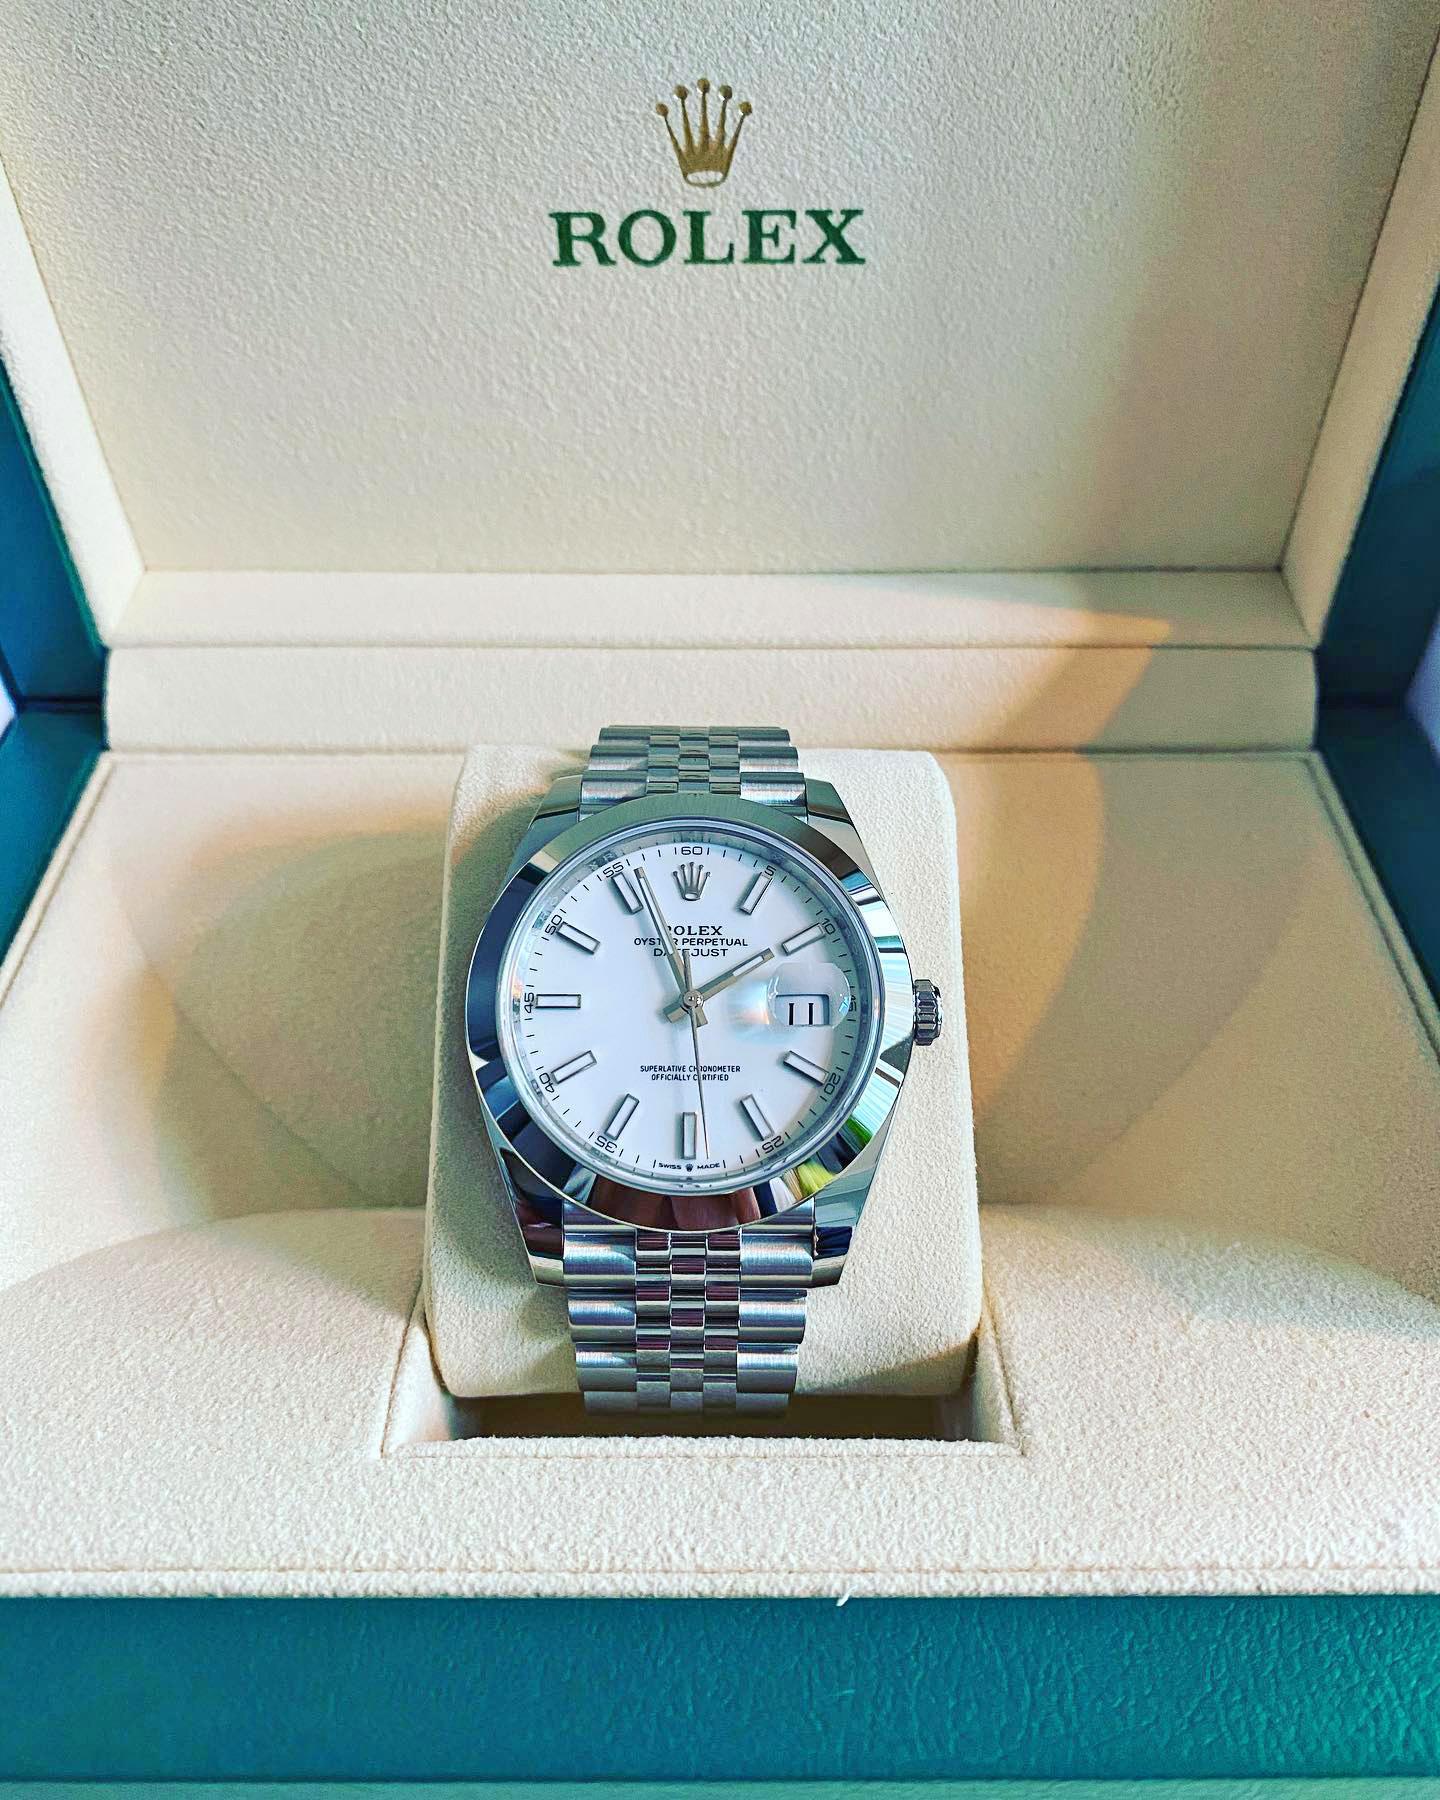 Rolex Datejust 41 watch with polished Stainless Steel case, Reference 126300-0006. This model has White dial with highly legible Chromalight display with long-lasting blue luminescence. The dial is adorned with polished hands - hour and minute hands